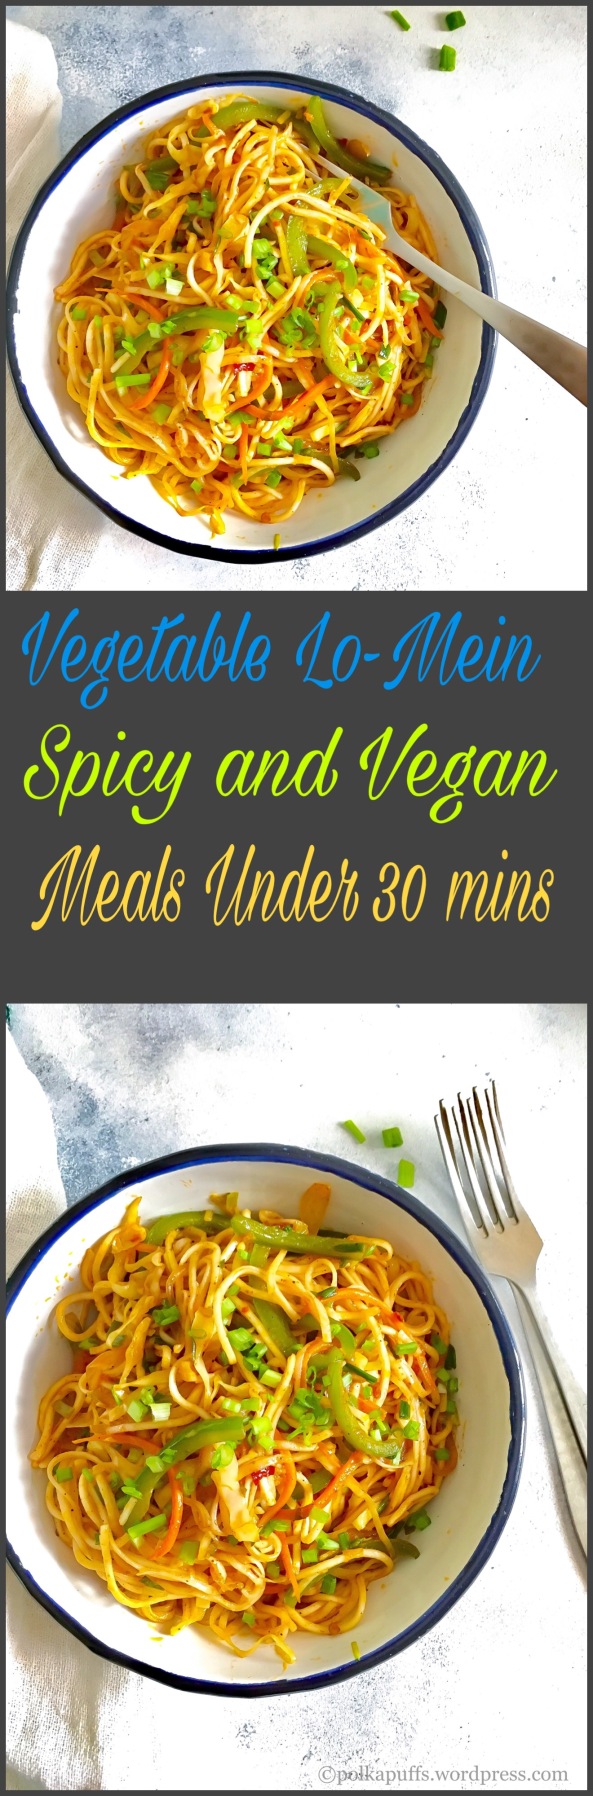 Vegetable Lo-Mein spicy and Vegan Meals under 30 mins Asian noodle recipe Polkapuffs